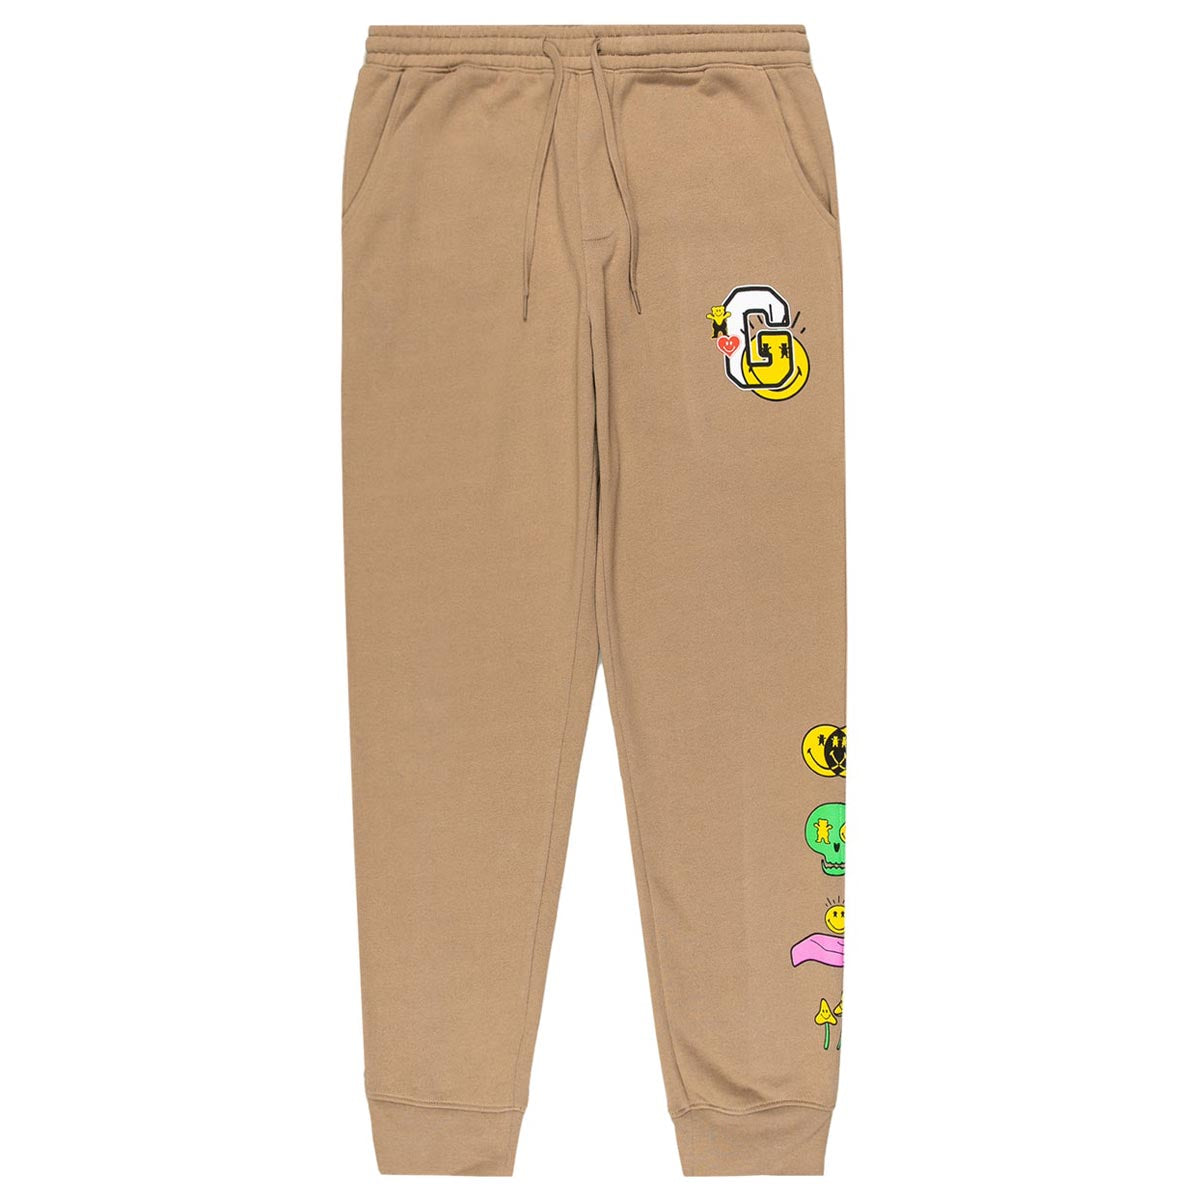 Grizzly x Smiley World Sweat Pants - Tan image 1